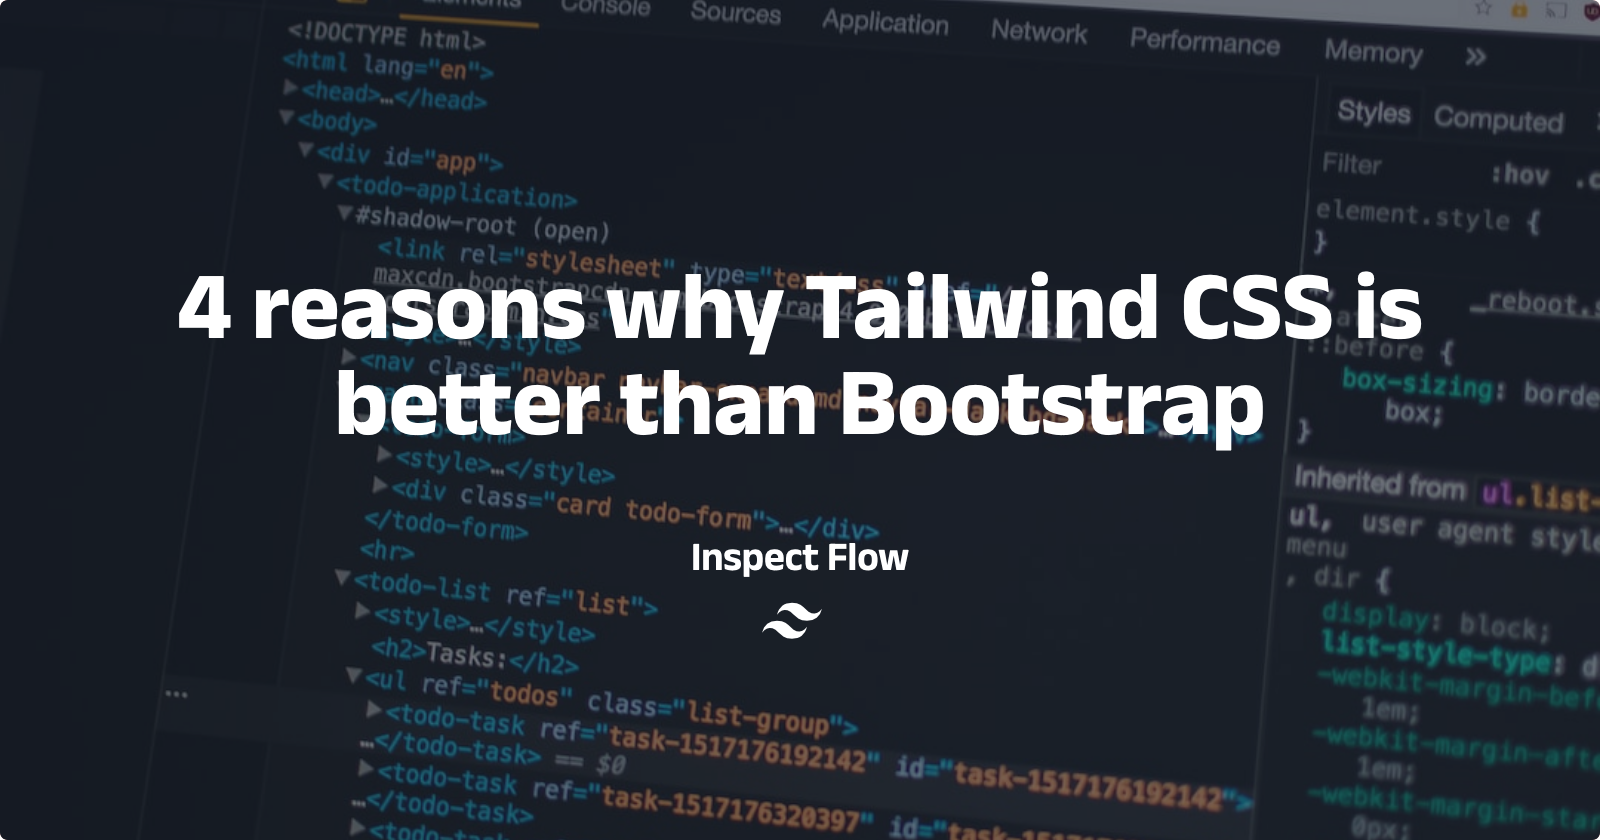 4 reasons why Tailwind CSS is better than Bootstrap Image